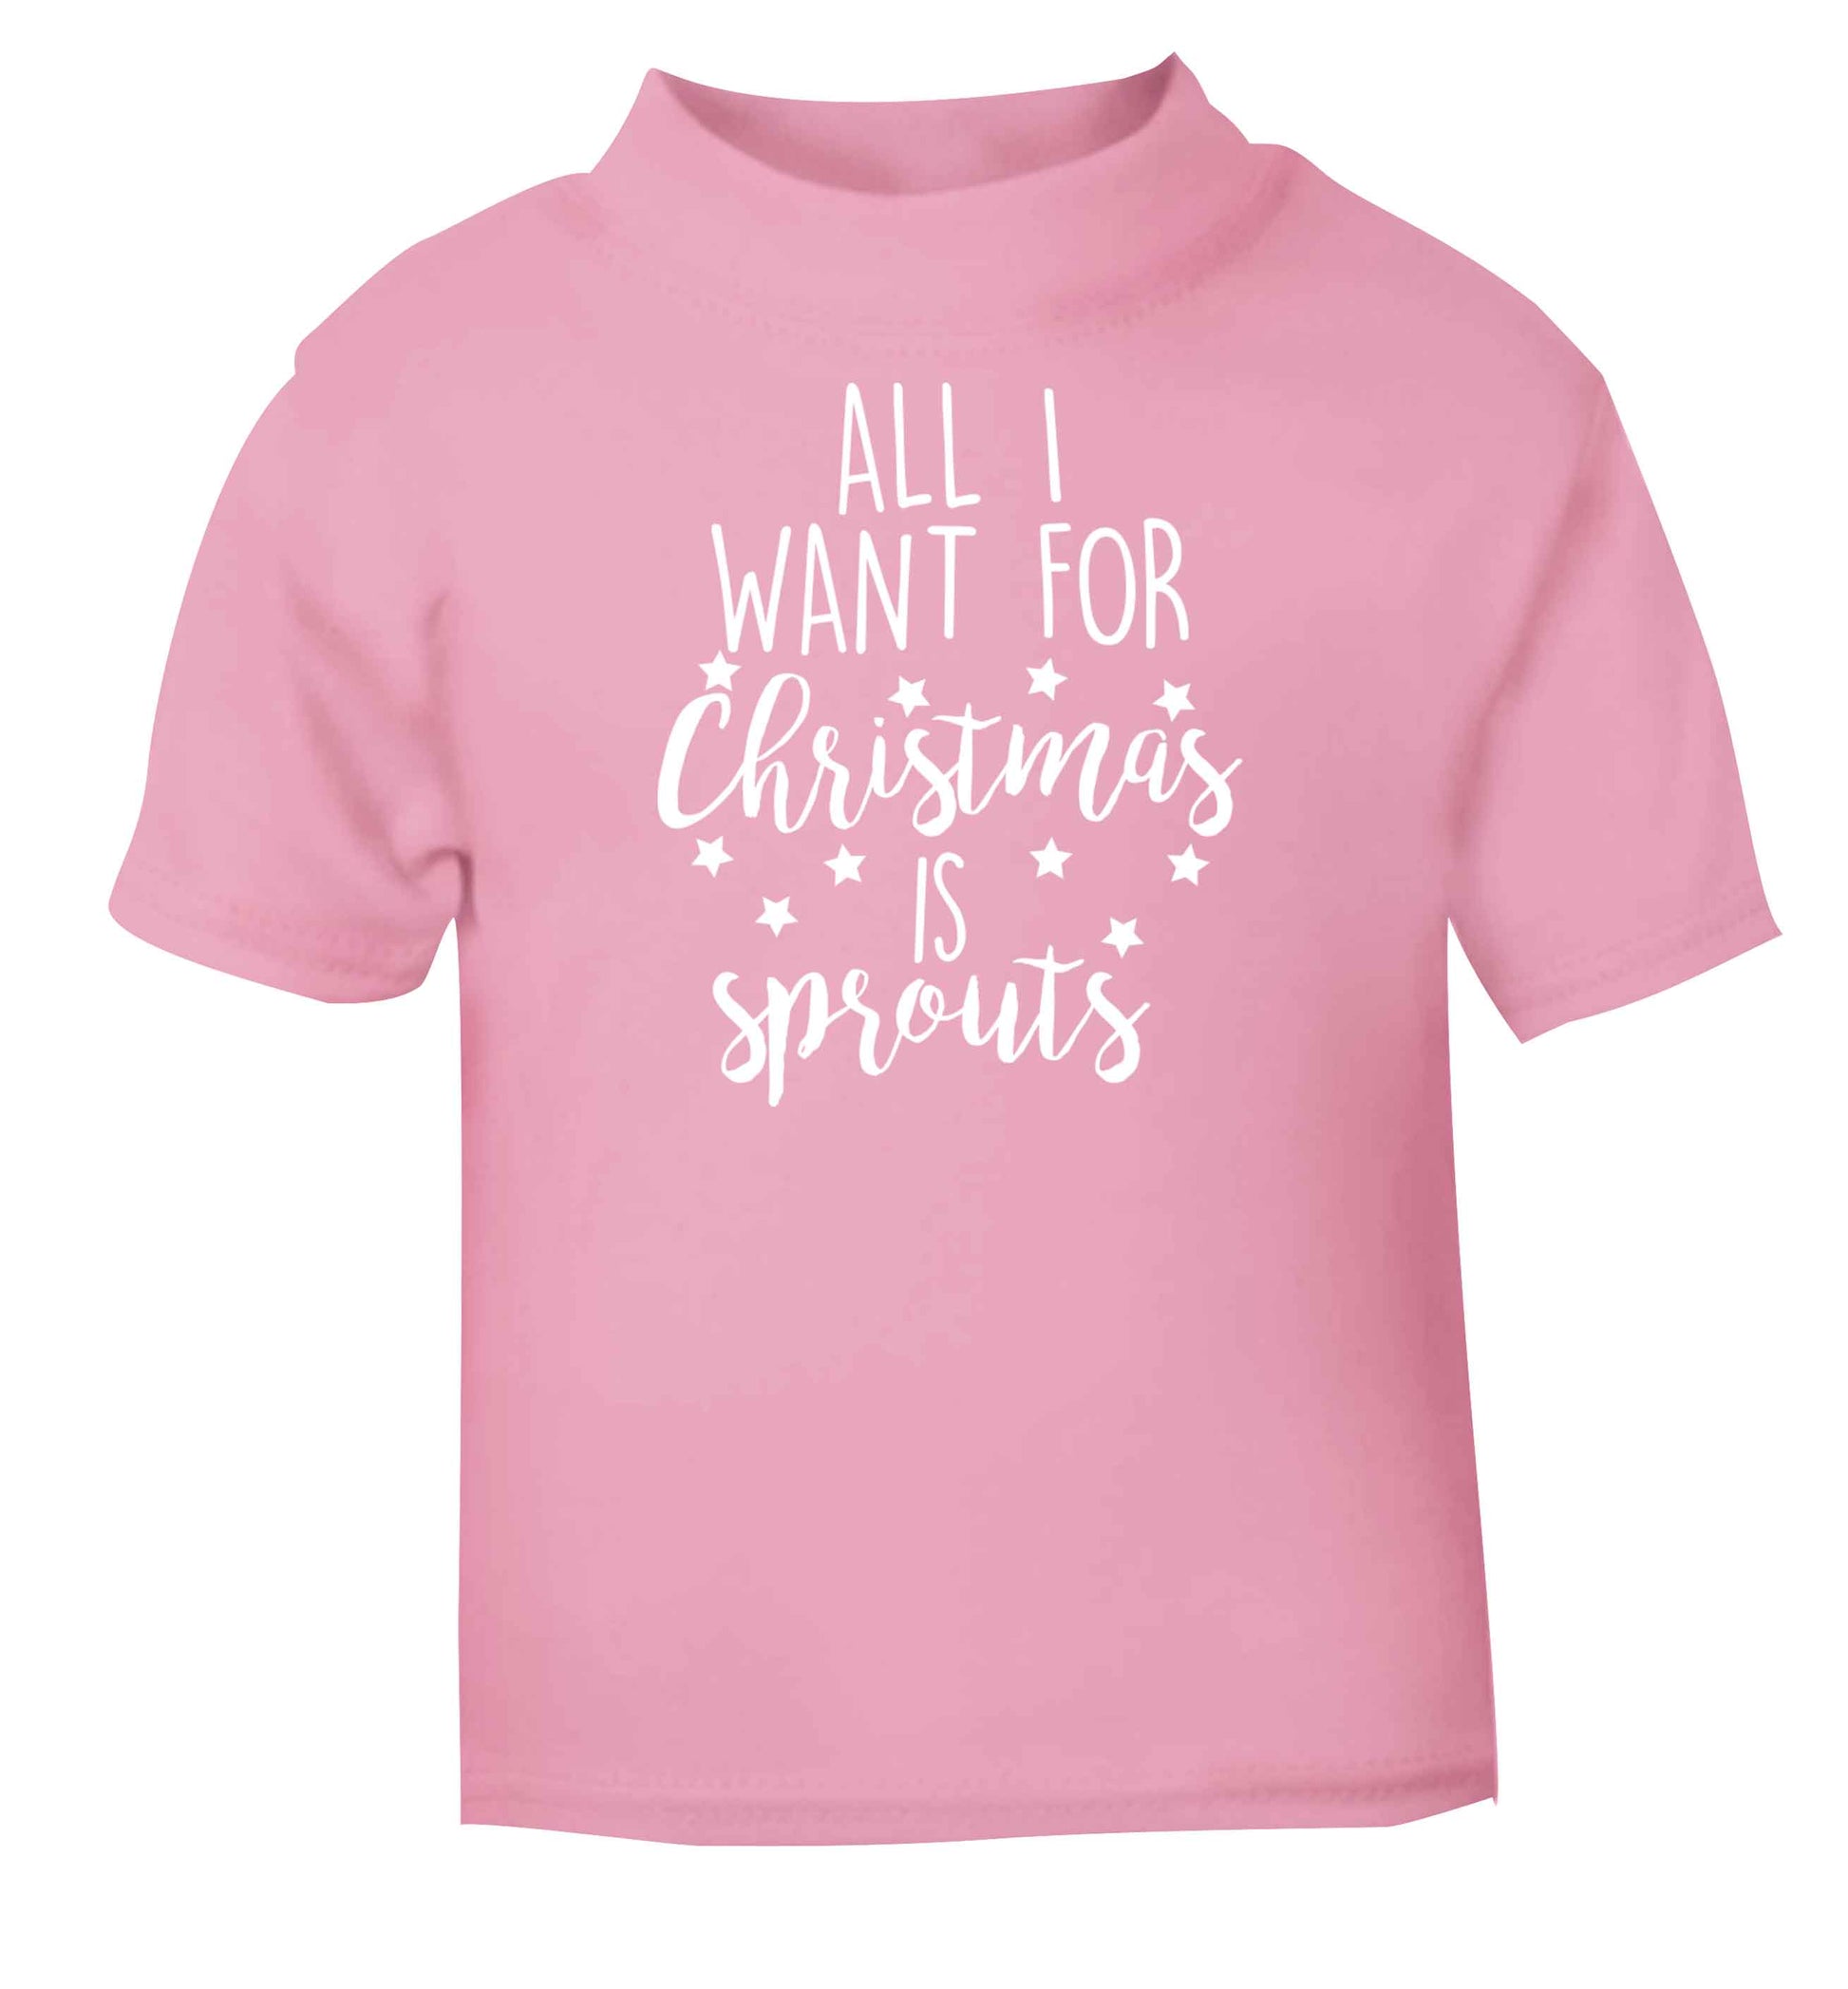 All I want for Christmas is sprouts light pink baby toddler Tshirt 2 Years